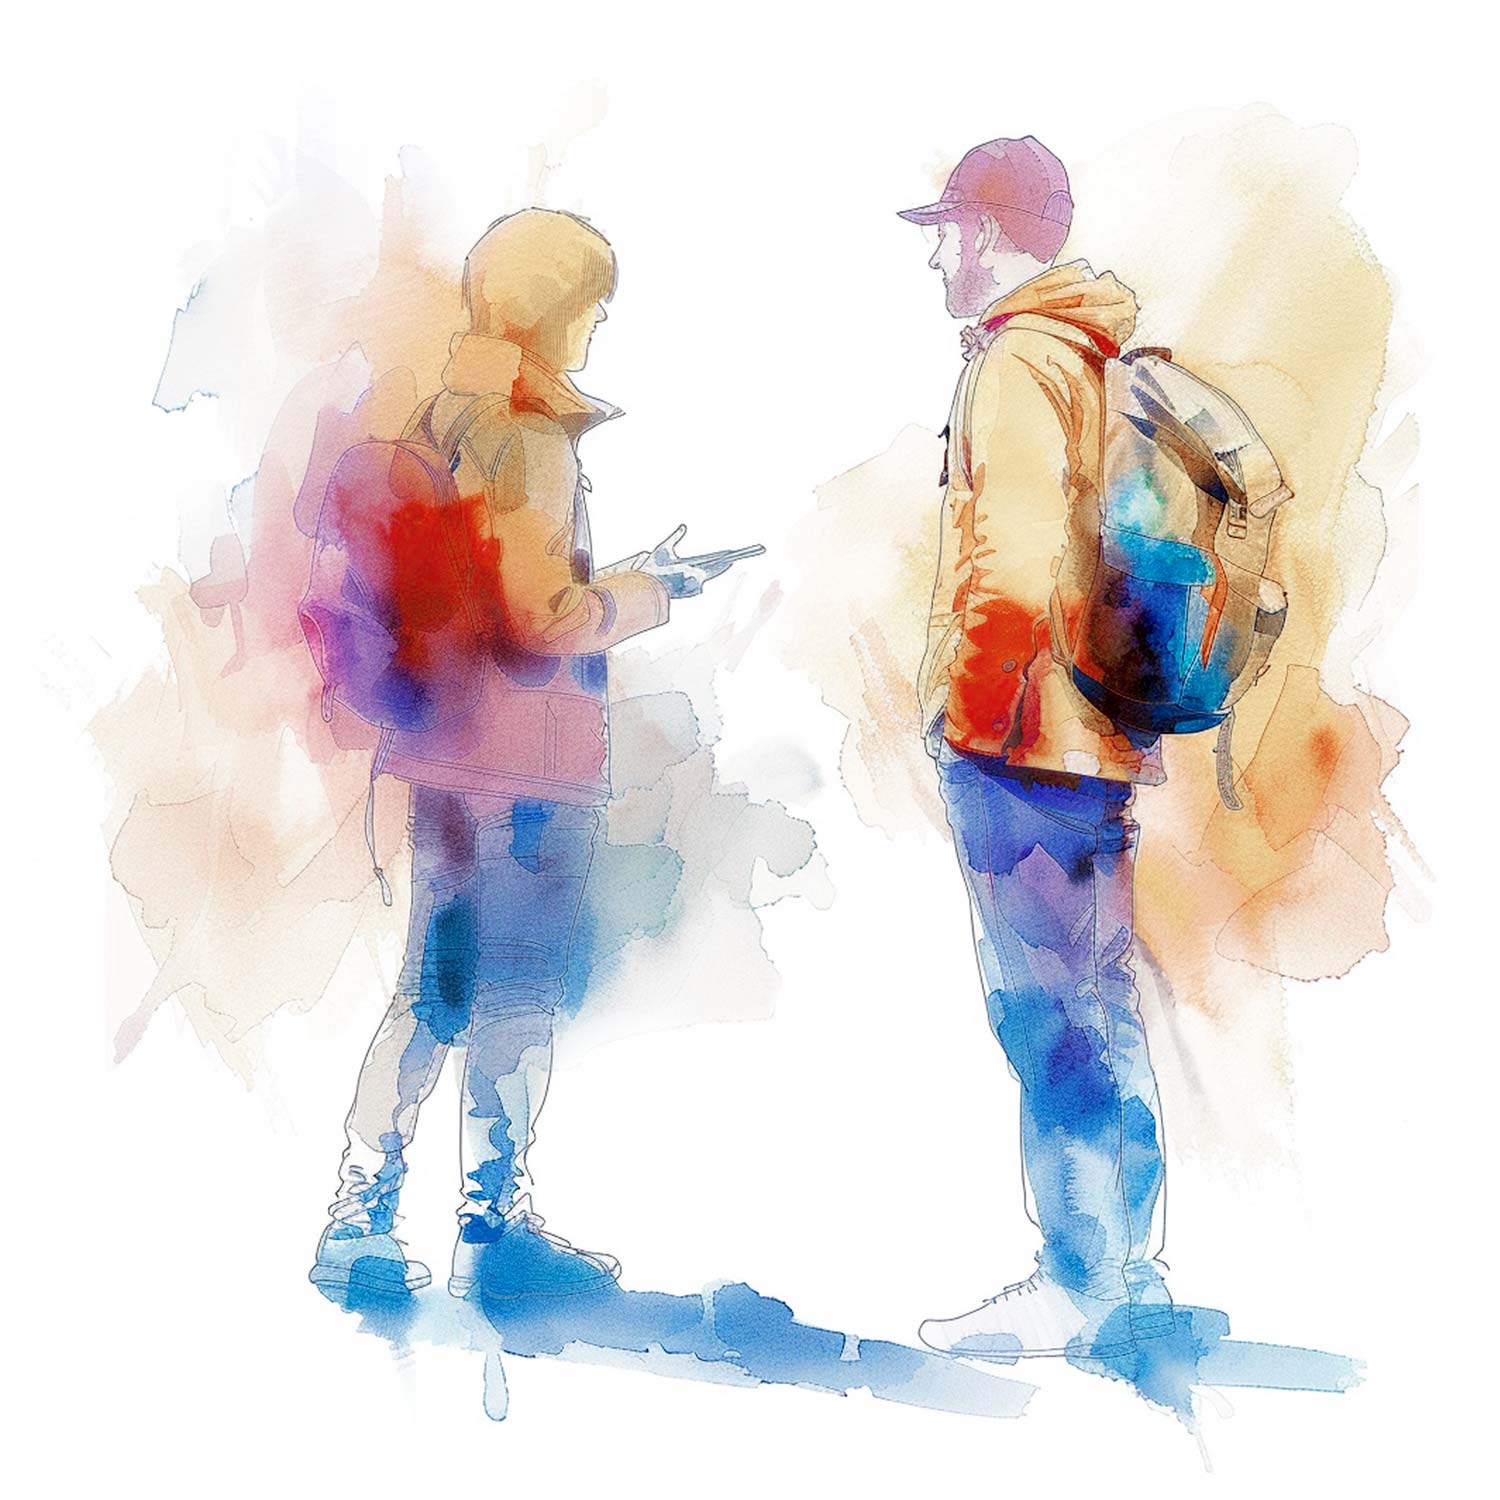 On a white background, this image is watercoloured and shows two individuals engaging in conversation with each other.